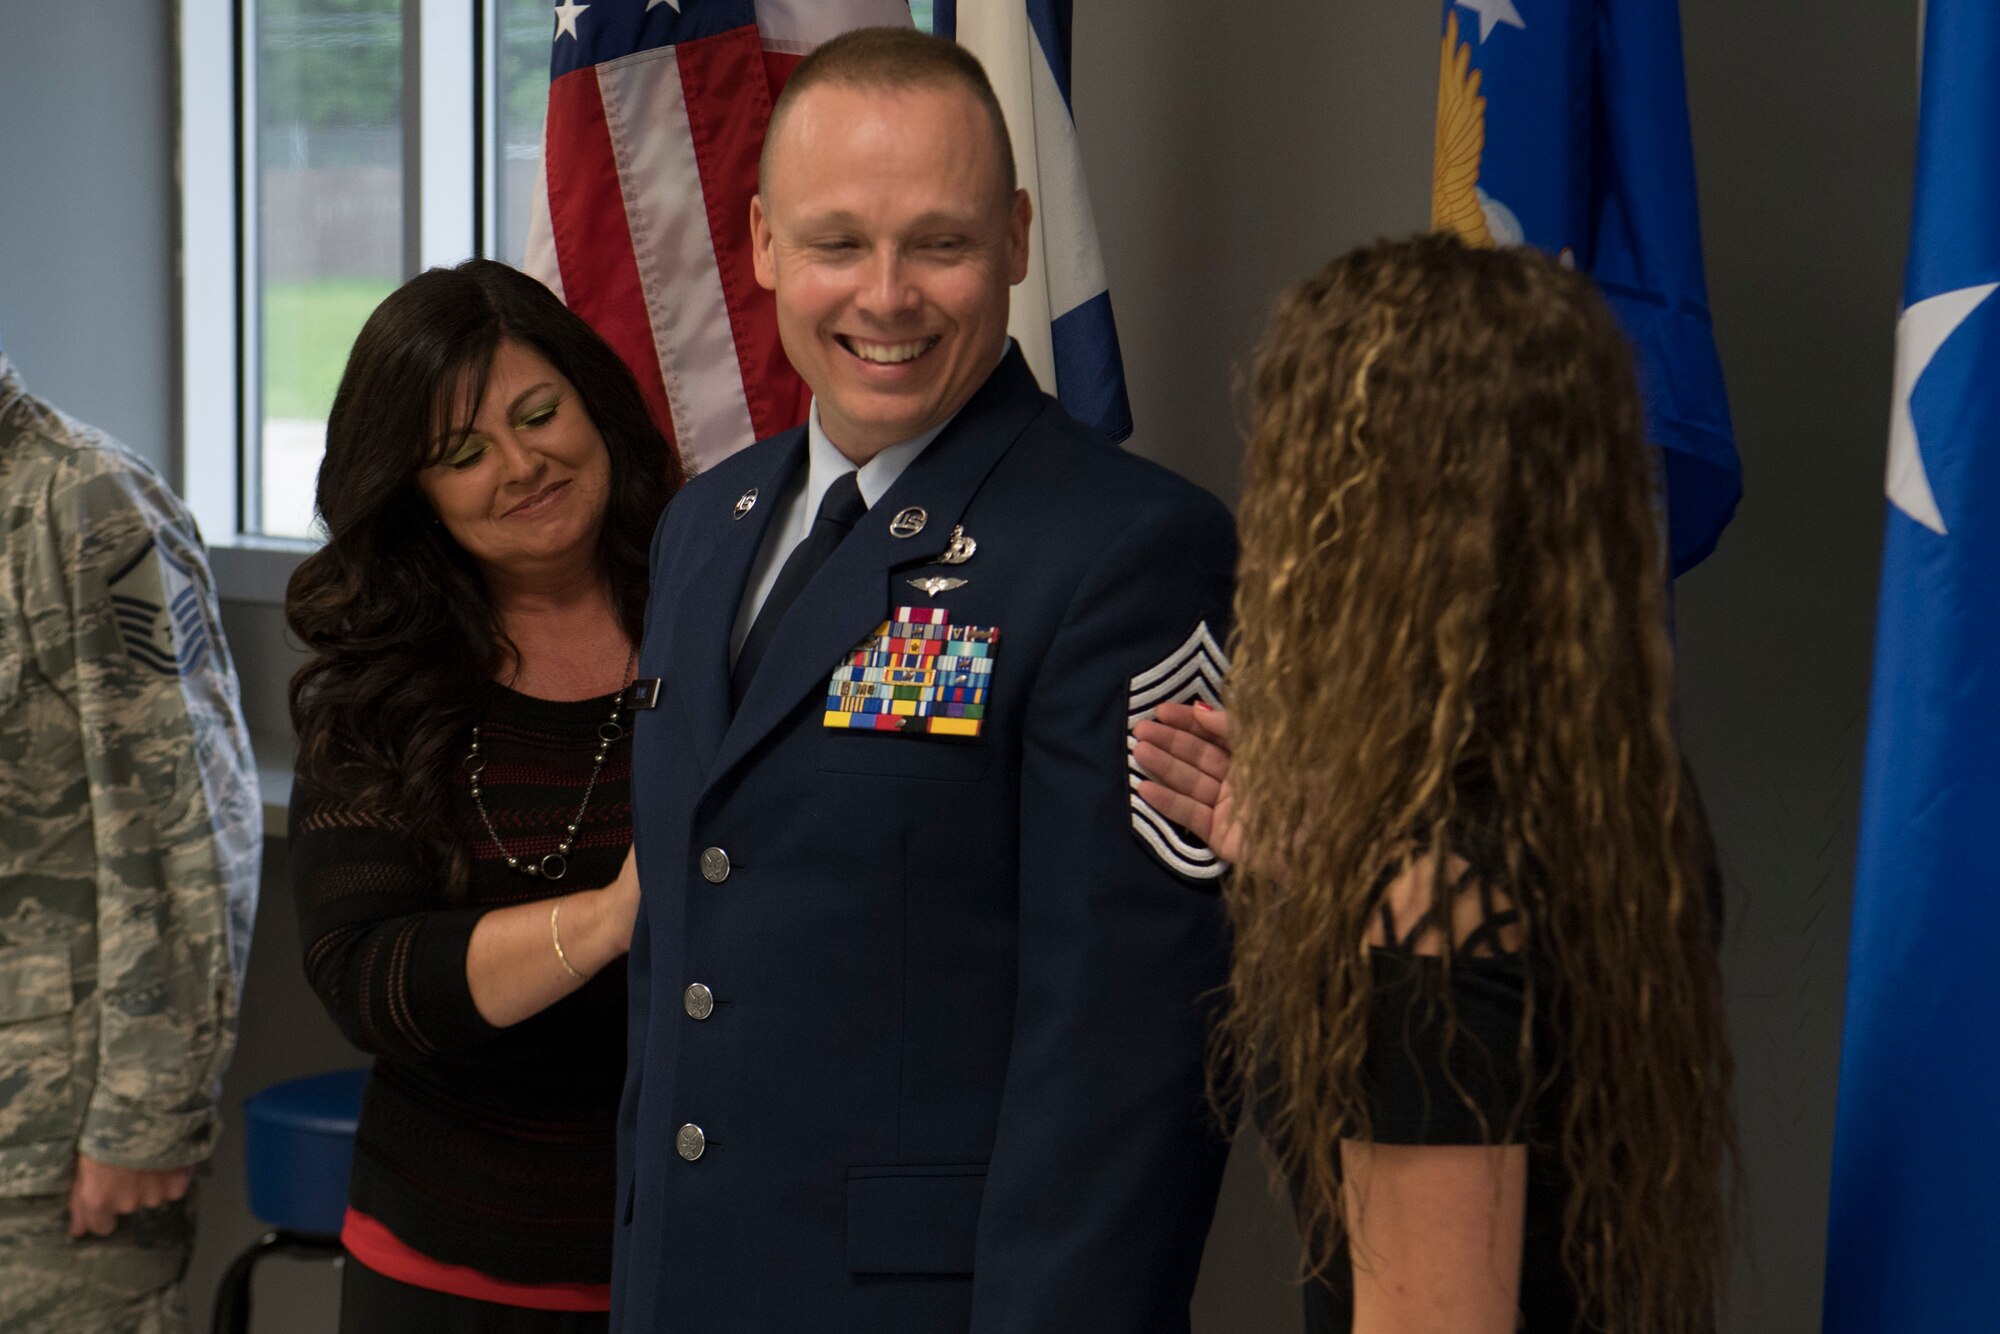 Chief Master Sgt. Jason Evans, 130th Force Support Squadron Chief, gets his new stripes tacked on by his wife and daughter Aug. 4, 2018 at McLaughlin Air National Guard Base, Charleston, W.Va.(U.S. Air National Guard Photo by Airman 1st Class Caleb Vance)